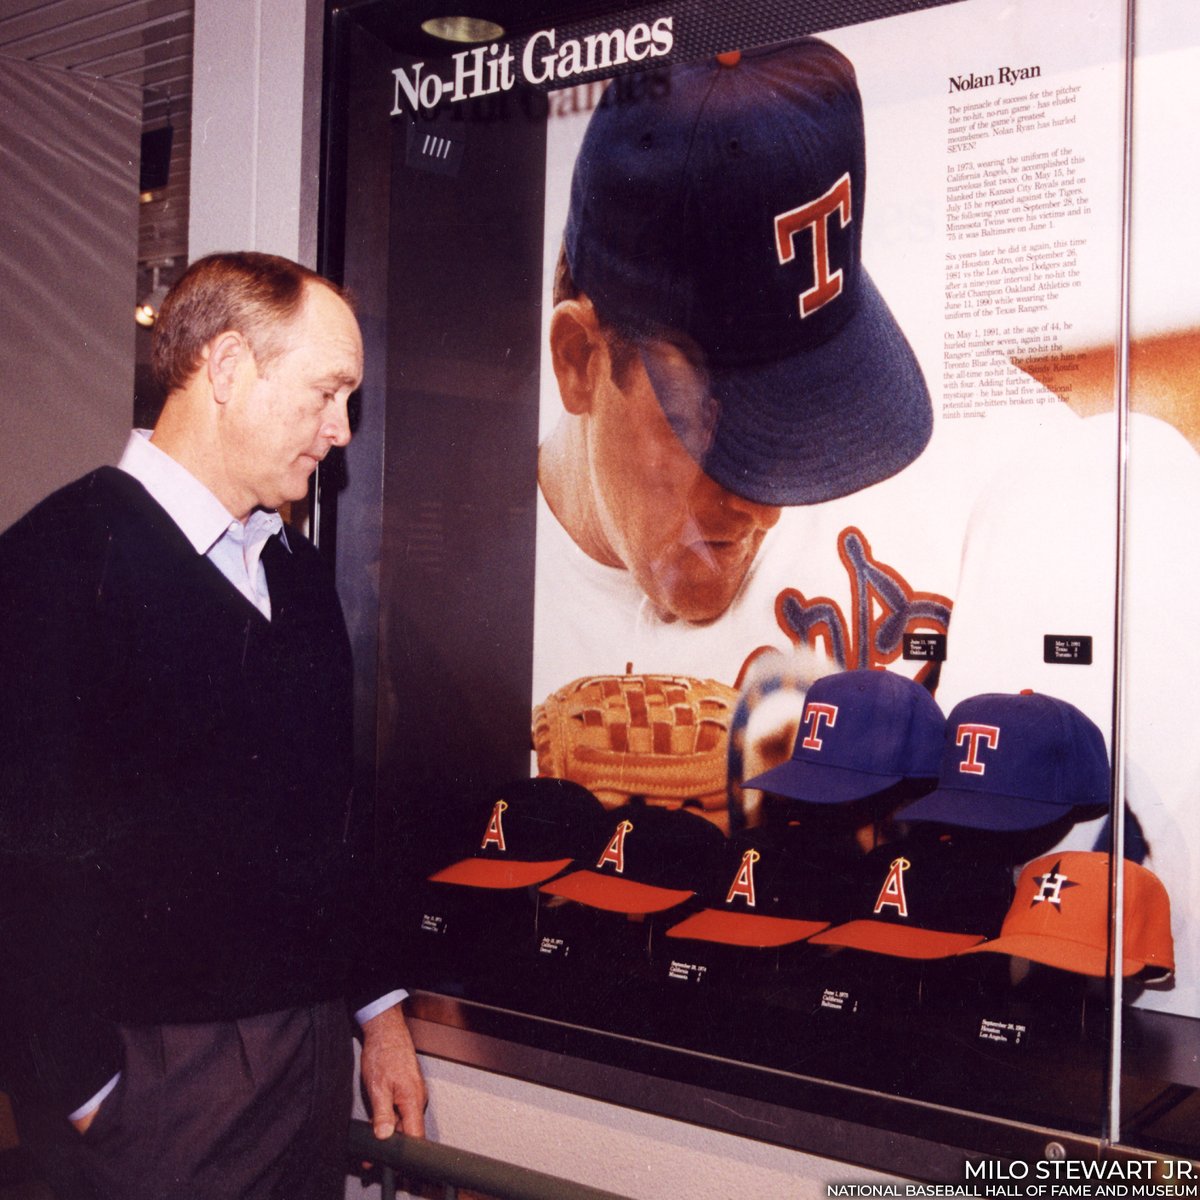 Tip your cap to a legend. Nolan Ryan donated caps from each of his record seven no-hitters to the Hall of Fame.